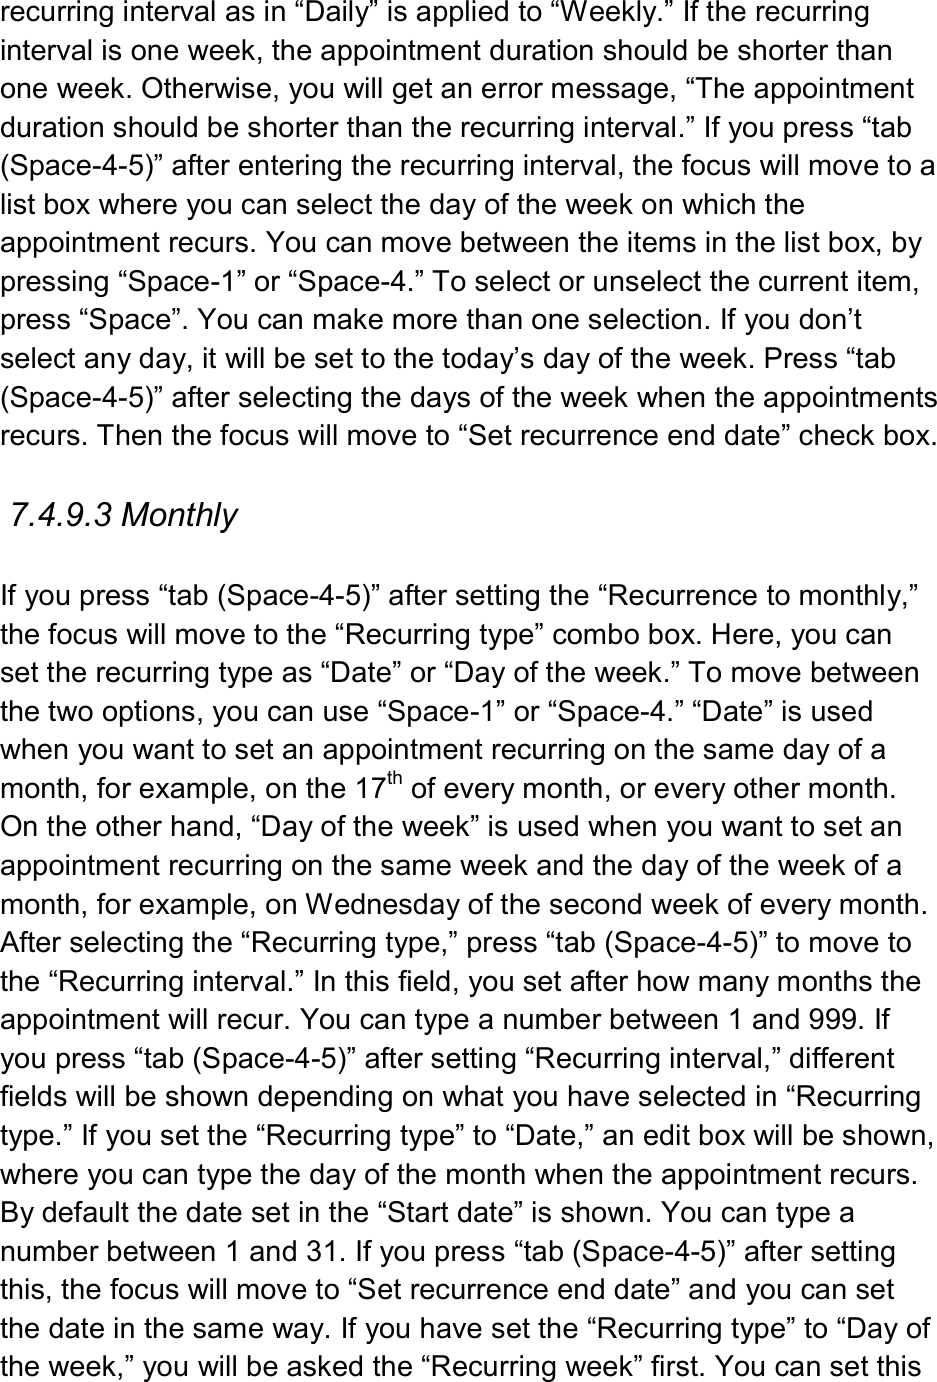  recurring interval as in “Daily” is applied to “Weekly.” If the recurring interval is one week, the appointment duration should be shorter than one week. Otherwise, you will get an error message, “The appointment duration should be shorter than the recurring interval.” If you press “tab (Space-4-5)” after entering the recurring interval, the focus will move to a list box where you can select the day of the week on which the appointment recurs. You can move between the items in the list box, by pressing “Space-1” or “Space-4.” To select or unselect the current item, press “Space”. You can make more than one selection. If you don’t select any day, it will be set to the today’s day of the week. Press “tab (Space-4-5)” after selecting the days of the week when the appointments recurs. Then the focus will move to “Set recurrence end date” check box.    7.4.9.3 Monthly  If you press “tab (Space-4-5)” after setting the “Recurrence to monthly,” the focus will move to the “Recurring type” combo box. Here, you can set the recurring type as “Date” or “Day of the week.” To move between the two options, you can use “Space-1” or “Space-4.” “Date” is used when you want to set an appointment recurring on the same day of a month, for example, on the 17th of every month, or every other month. On the other hand, “Day of the week” is used when you want to set an appointment recurring on the same week and the day of the week of a month, for example, on Wednesday of the second week of every month. After selecting the “Recurring type,” press “tab (Space-4-5)” to move to the “Recurring interval.” In this field, you set after how many months the appointment will recur. You can type a number between 1 and 999. If you press “tab (Space-4-5)” after setting “Recurring interval,” different fields will be shown depending on what you have selected in “Recurring type.” If you set the “Recurring type” to “Date,” an edit box will be shown, where you can type the day of the month when the appointment recurs. By default the date set in the “Start date” is shown. You can type a number between 1 and 31. If you press “tab (Space-4-5)” after setting this, the focus will move to “Set recurrence end date” and you can set the date in the same way. If you have set the “Recurring type” to “Day of the week,” you will be asked the “Recurring week” first. You can set this 